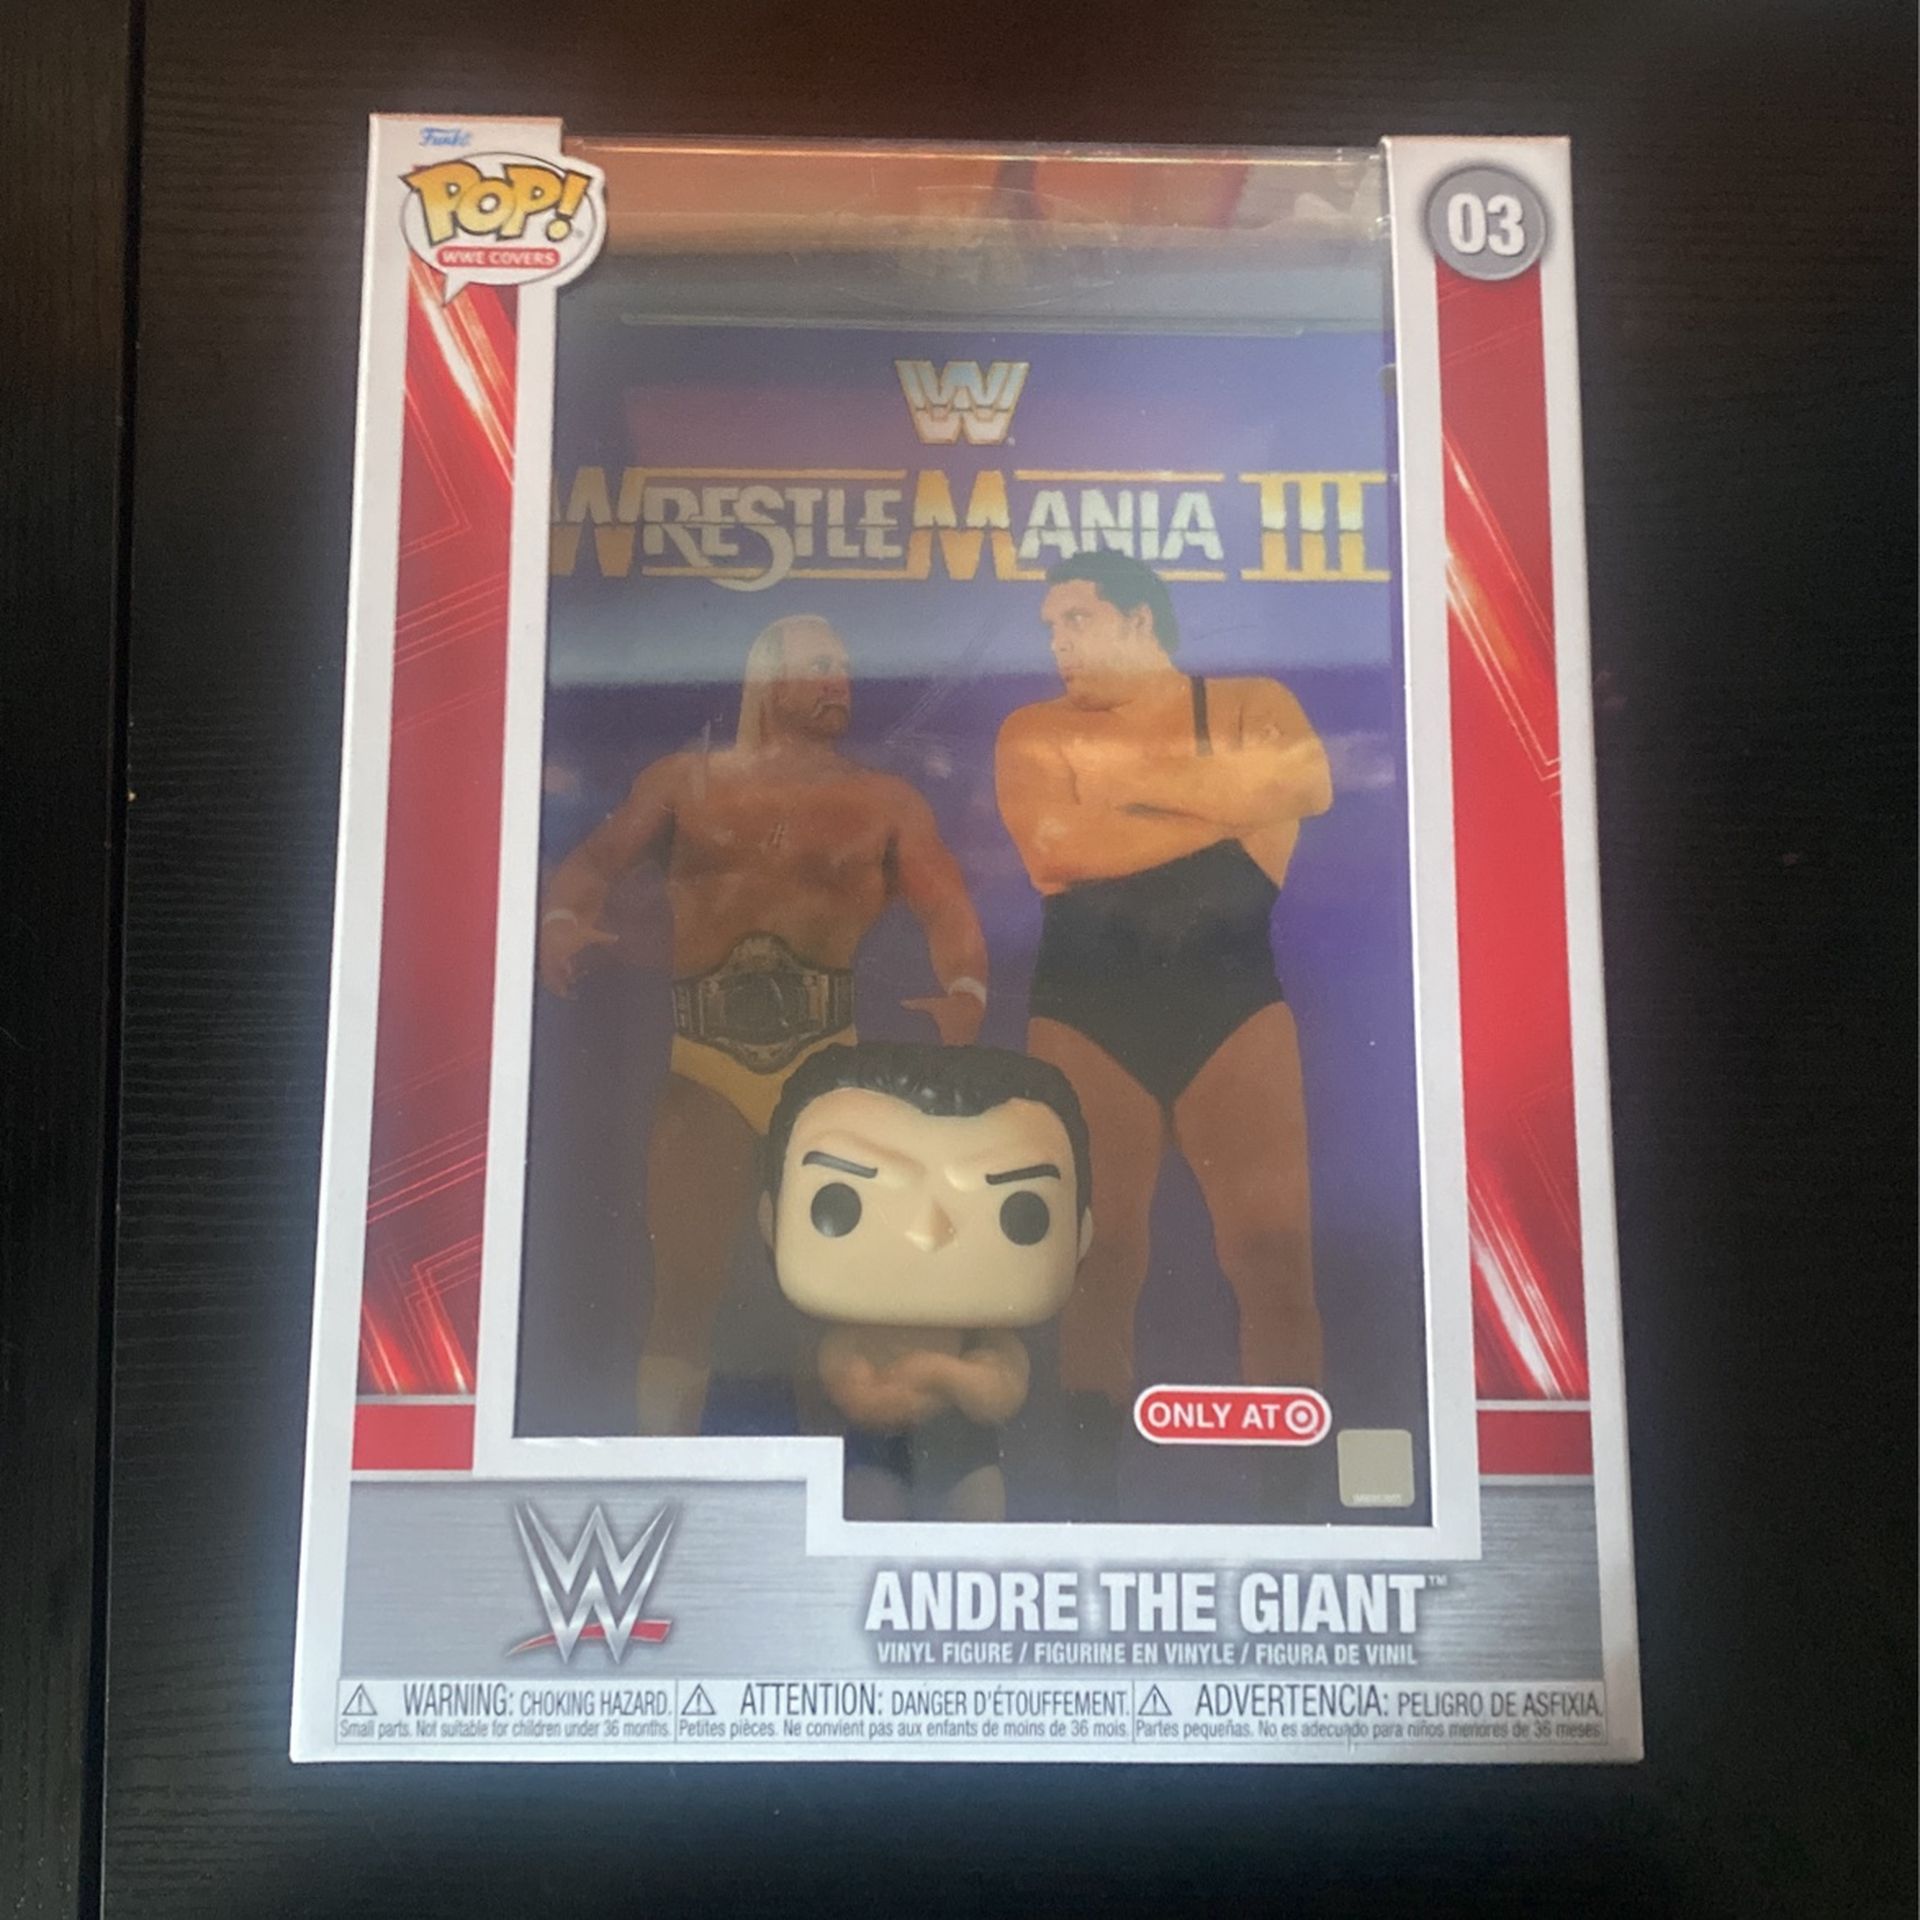 Andre The Giant Funko Pop